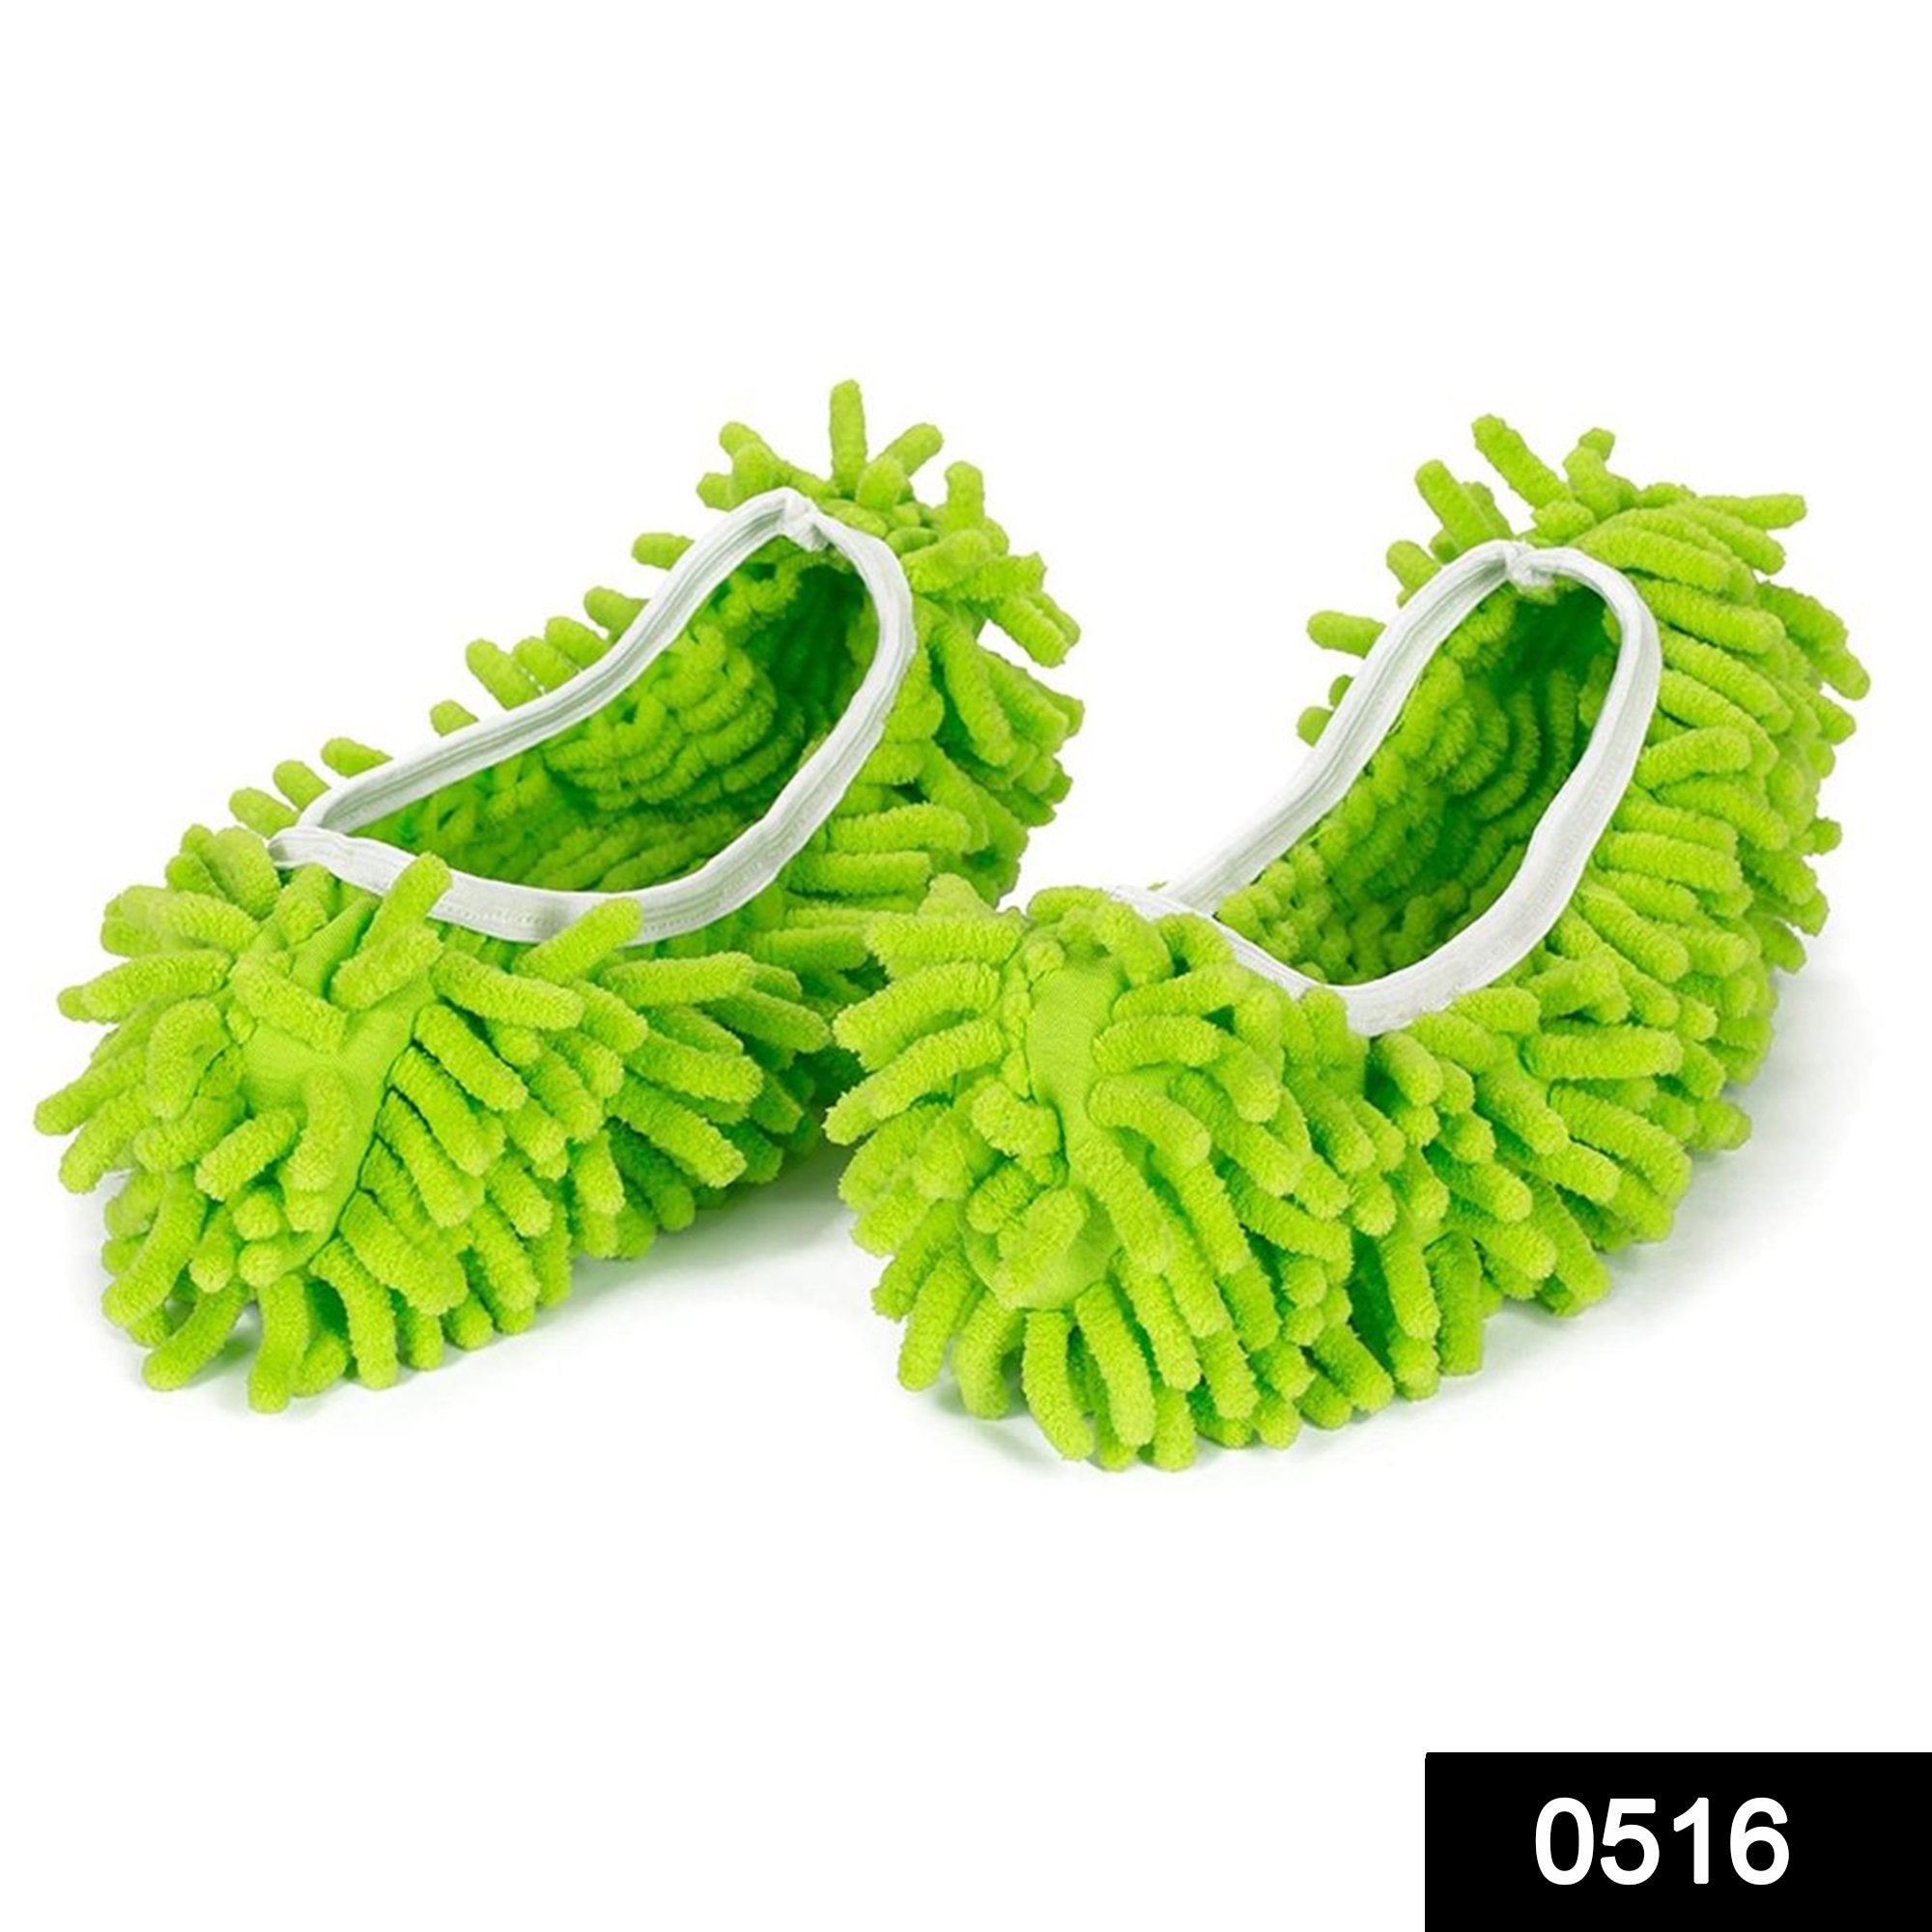 0516 Multi-Function Washable Dust Mop/Floor Cleaning Slippers - SkyShopy